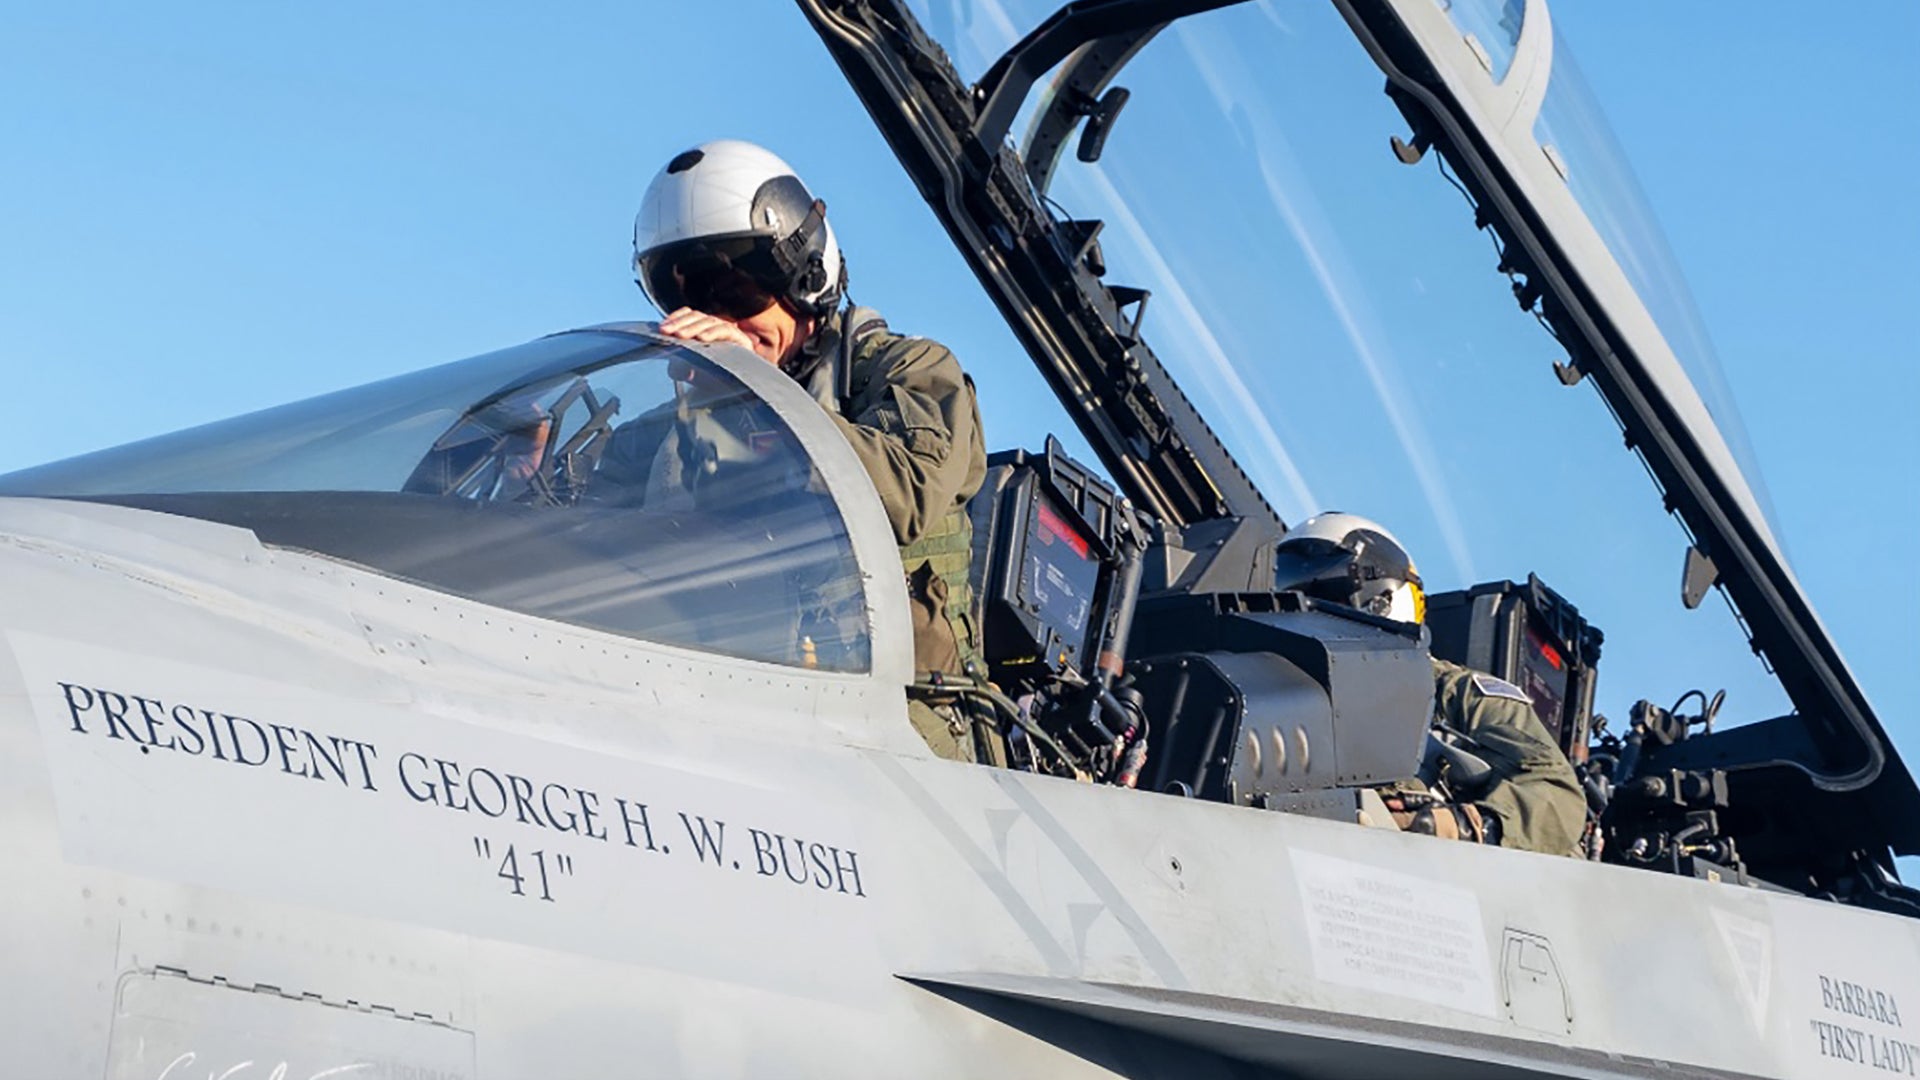 Navy Hornet Adorned With George Bush’s Name To Lead 21 Jet Flyover For Presidential Funeral